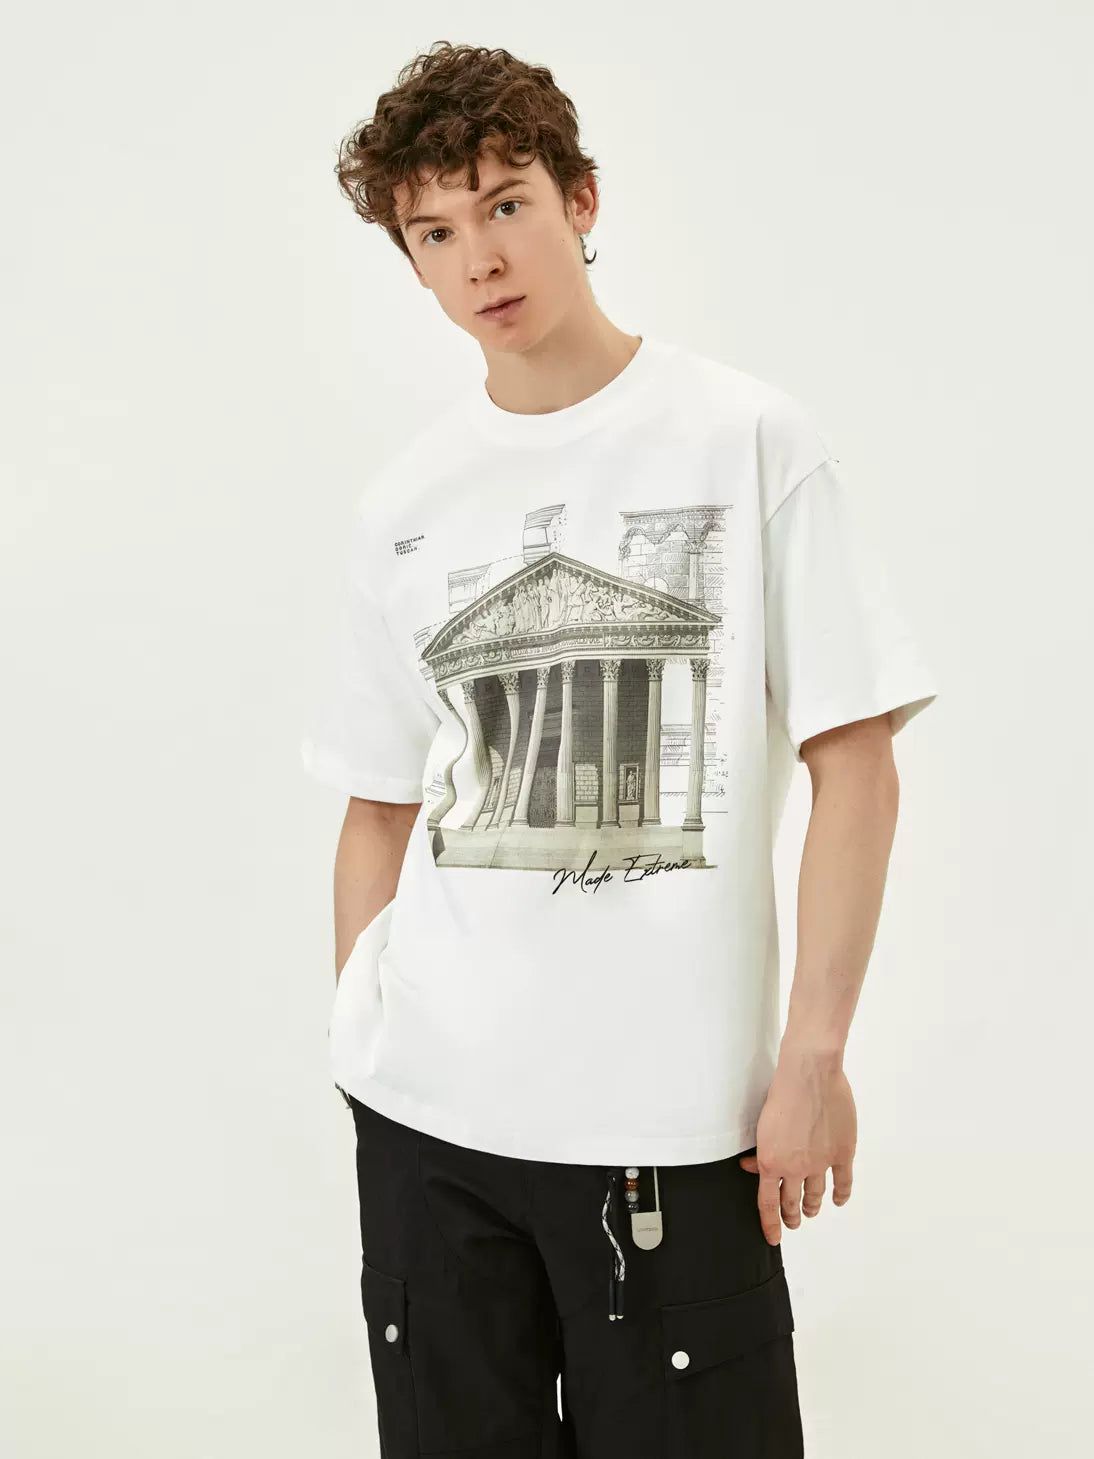 Architecture Graphic Print T-Shirt Korean Street Fashion T-Shirt By Made Extreme Shop Online at OH Vault